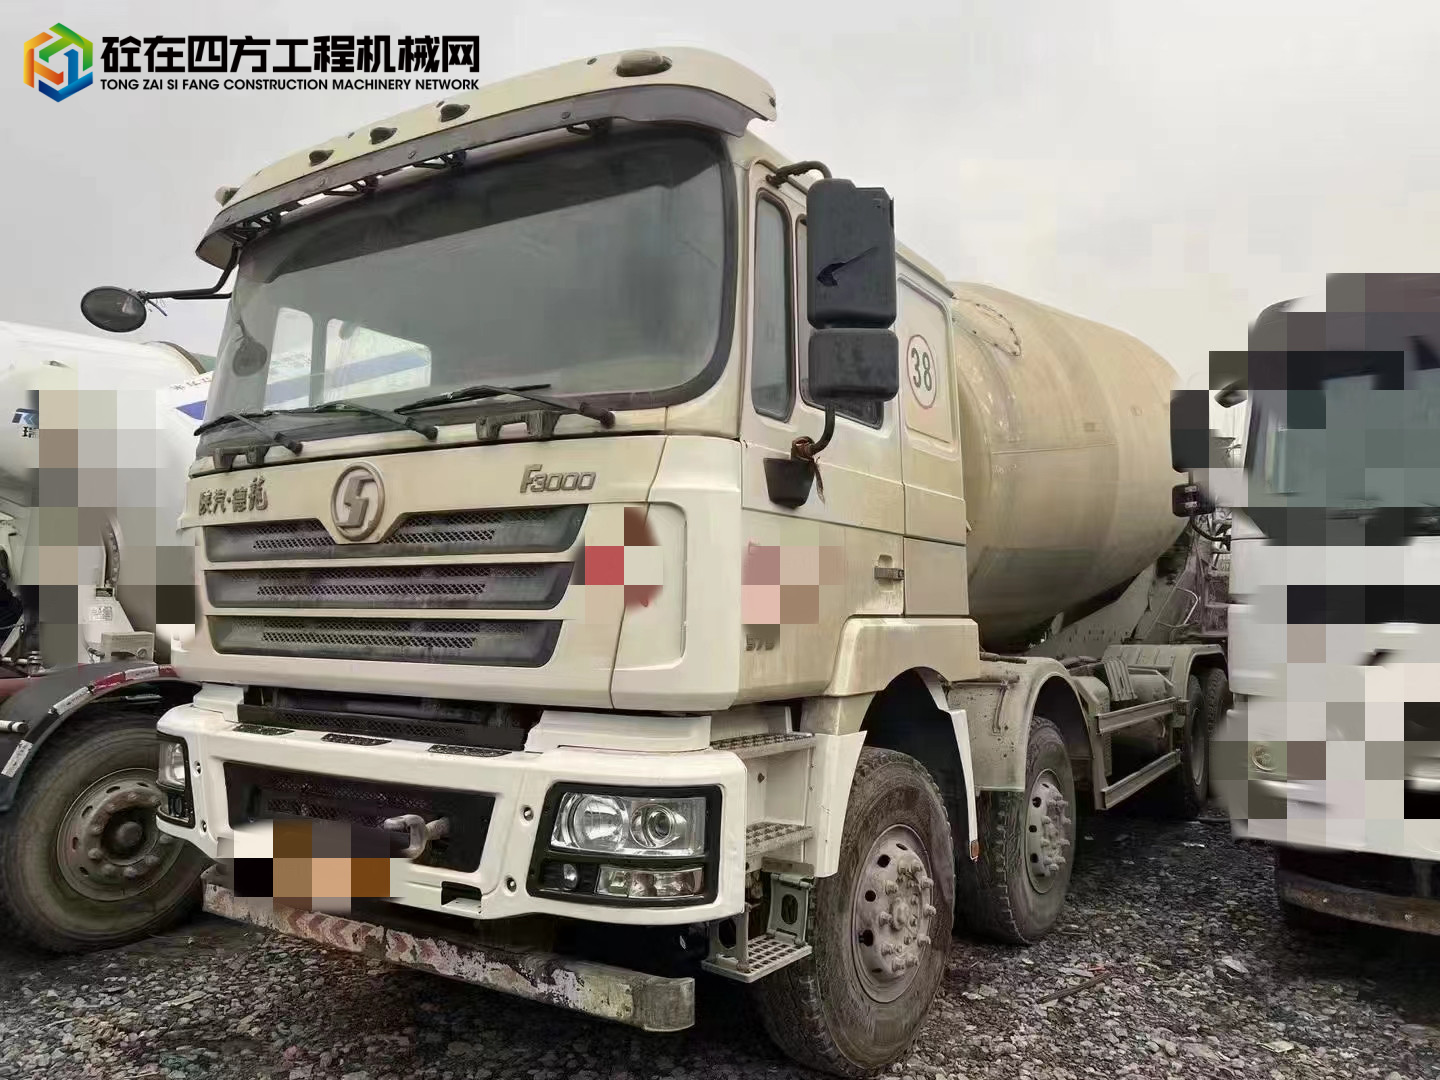 https://images.tongzsf.com/tong/truck_machine/20240219/165d2be8be329a.jpg